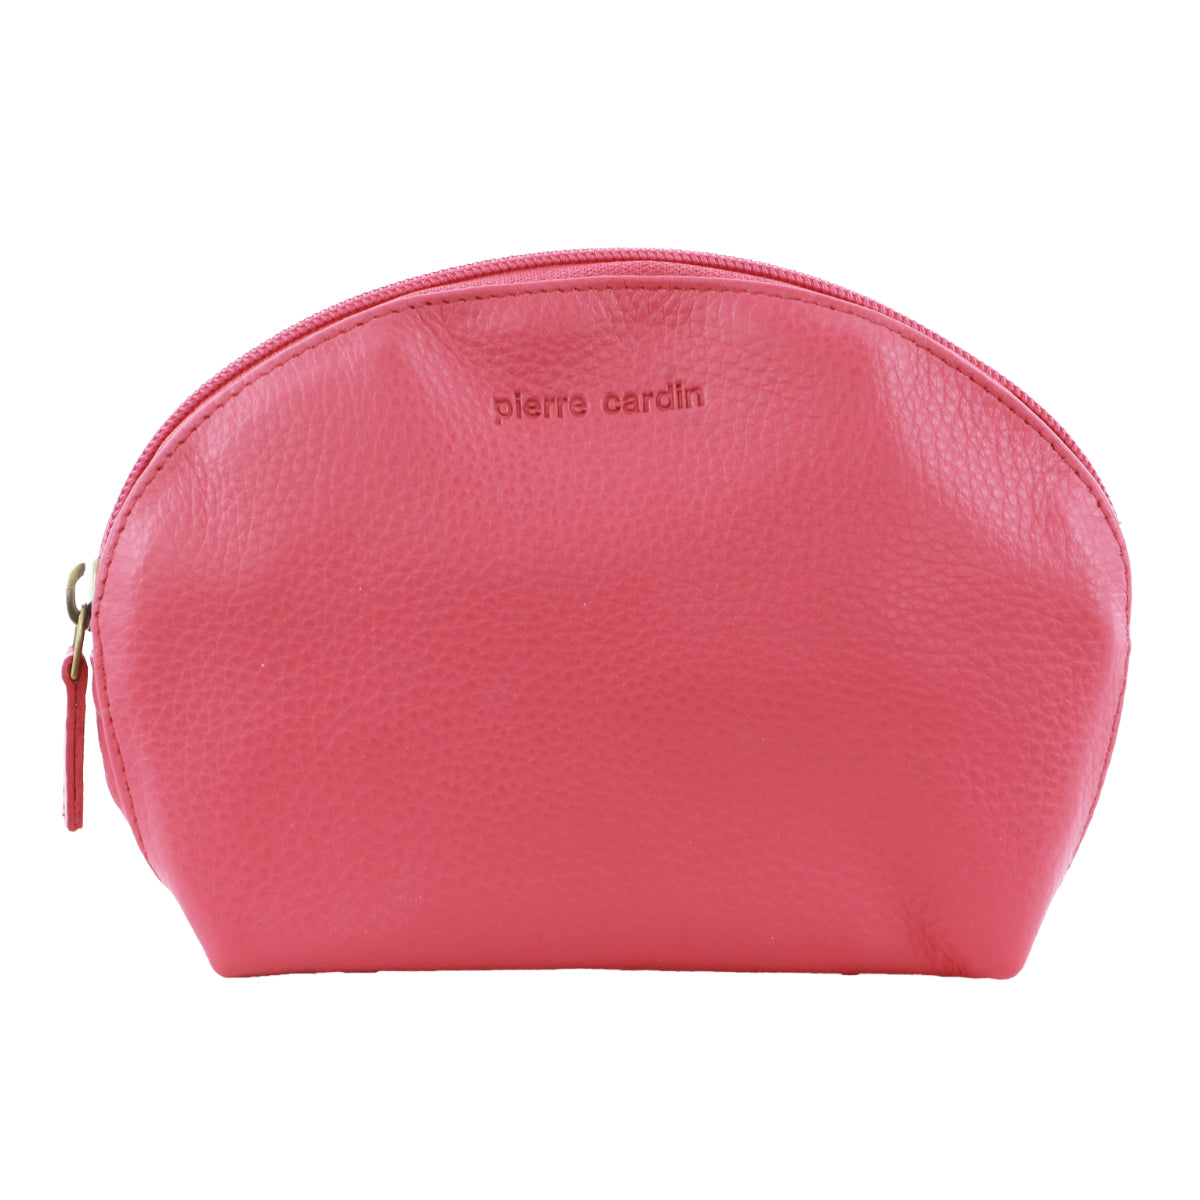 Pierre Cardin Leather Ladies Coin Purse in Pink